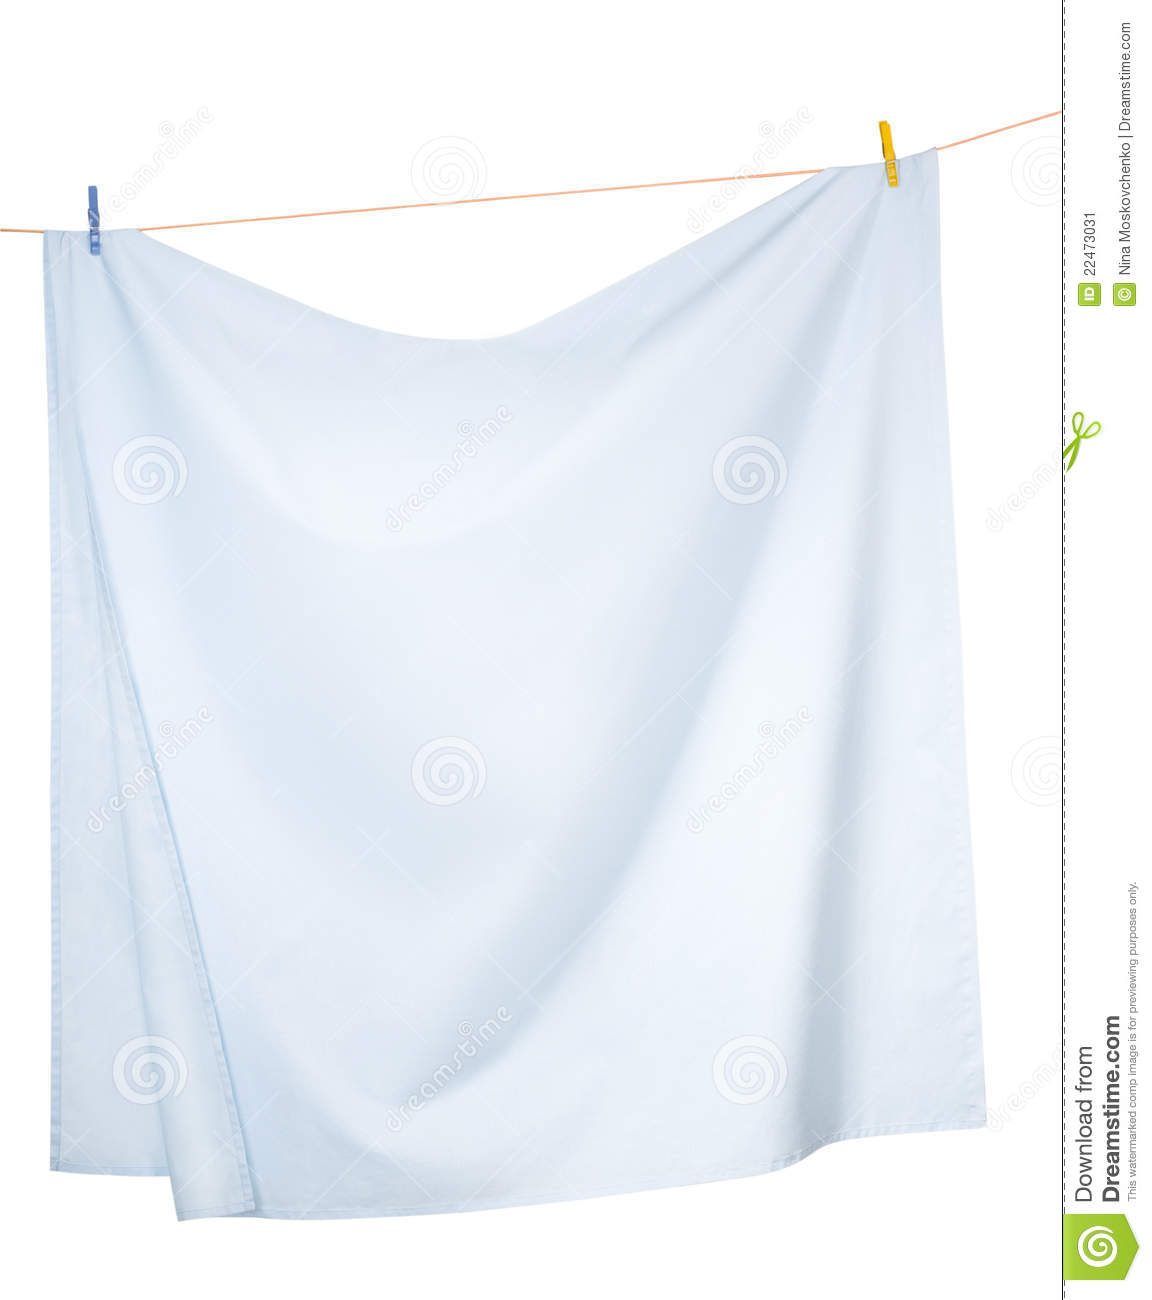 Linen Sheets Drying On A Rope Isolated On A White Background